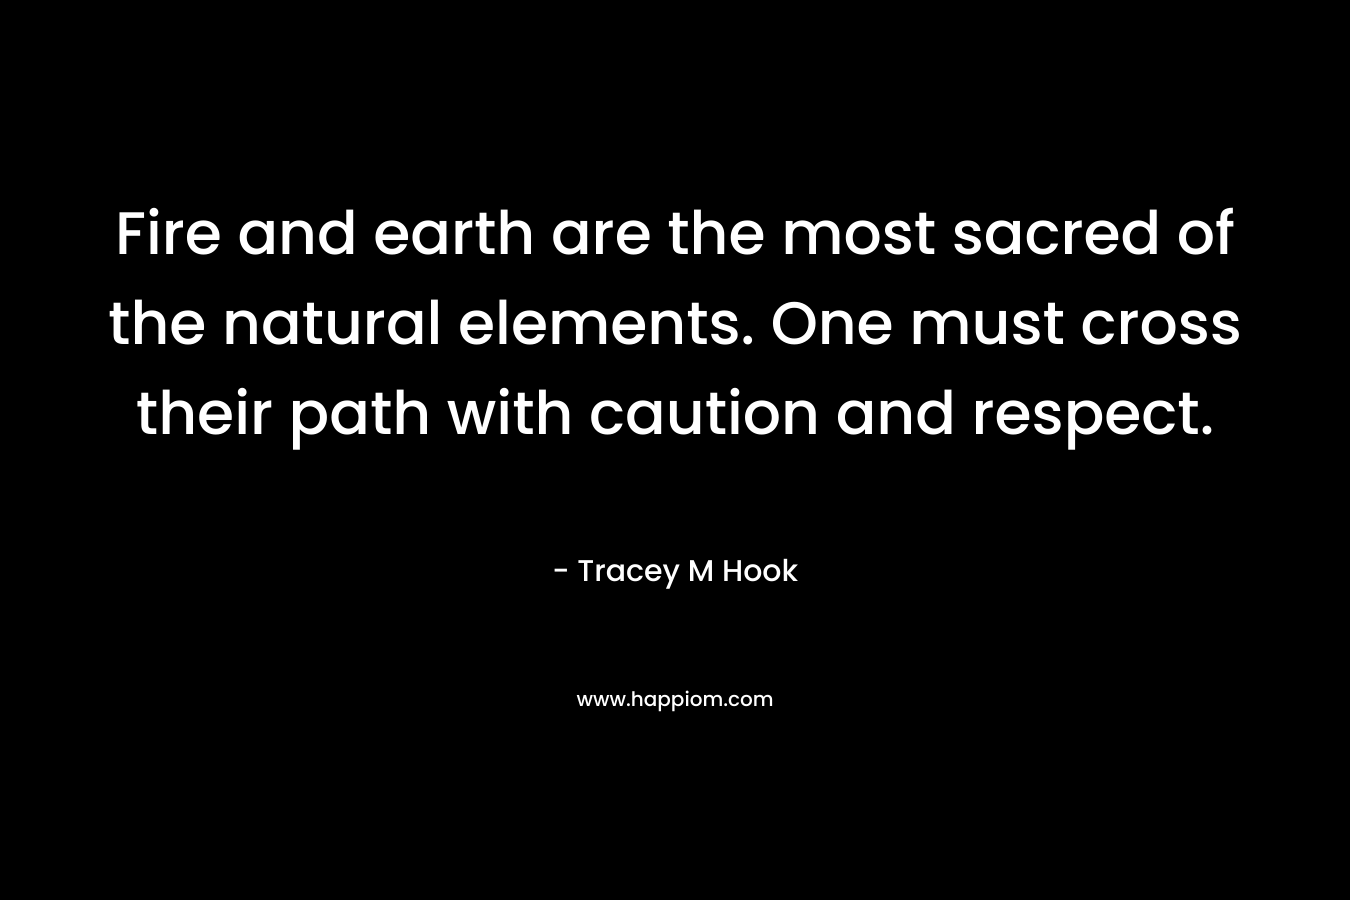 Fire and earth are the most sacred of the natural elements. One must cross their path with caution and respect. – Tracey M Hook